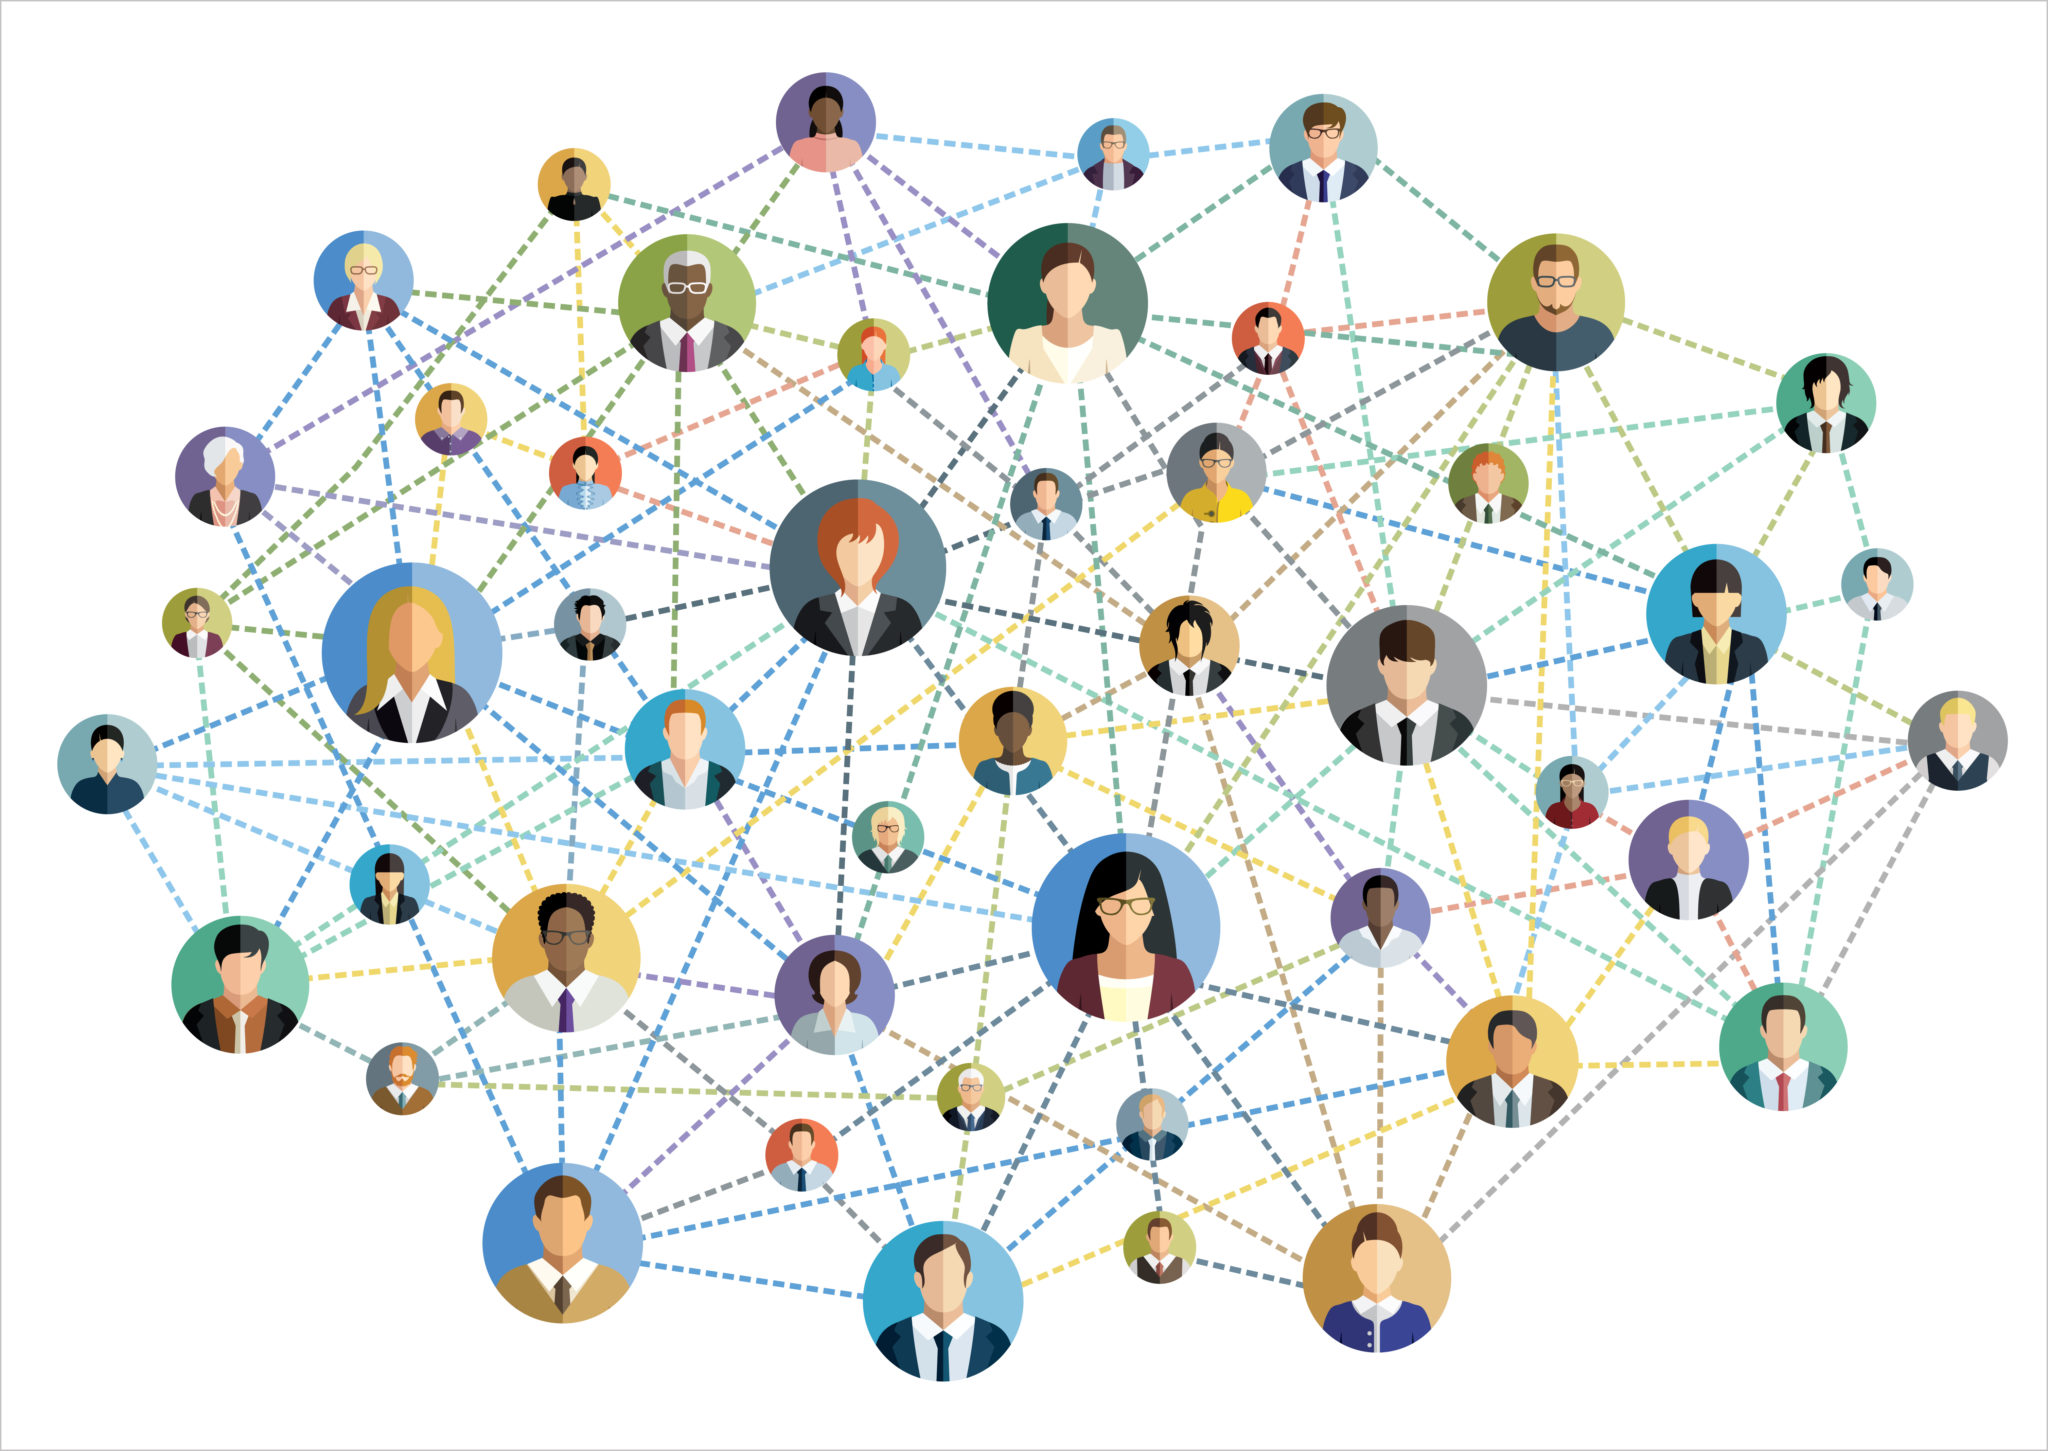 Networking: Building Your Contacts in New, More Effective Ways

